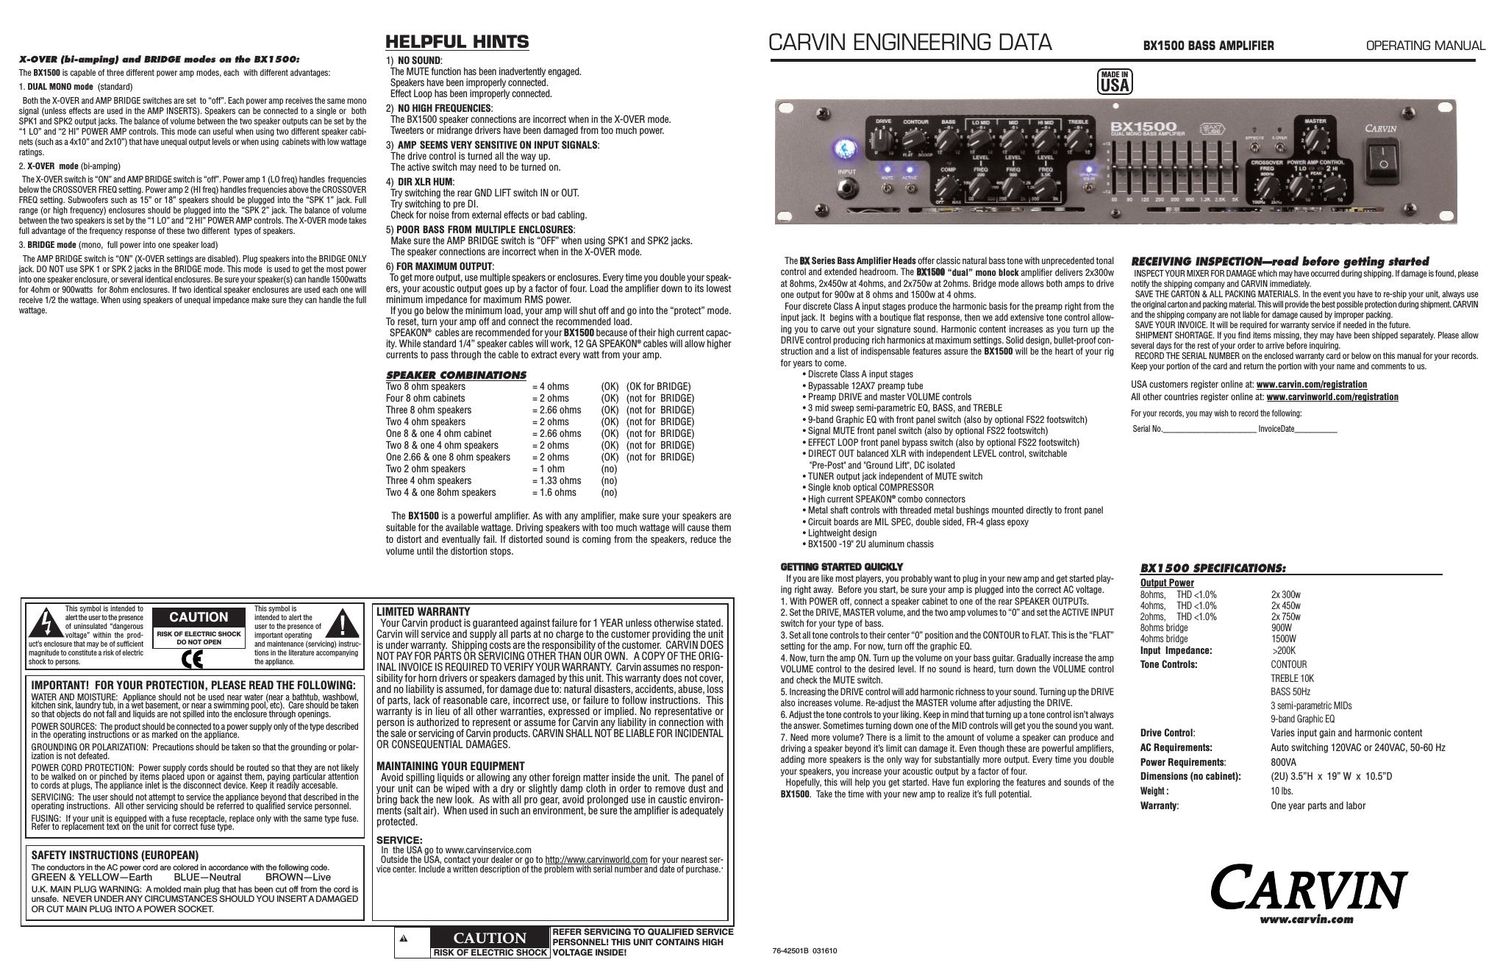 carvin bx 1500 owners manual